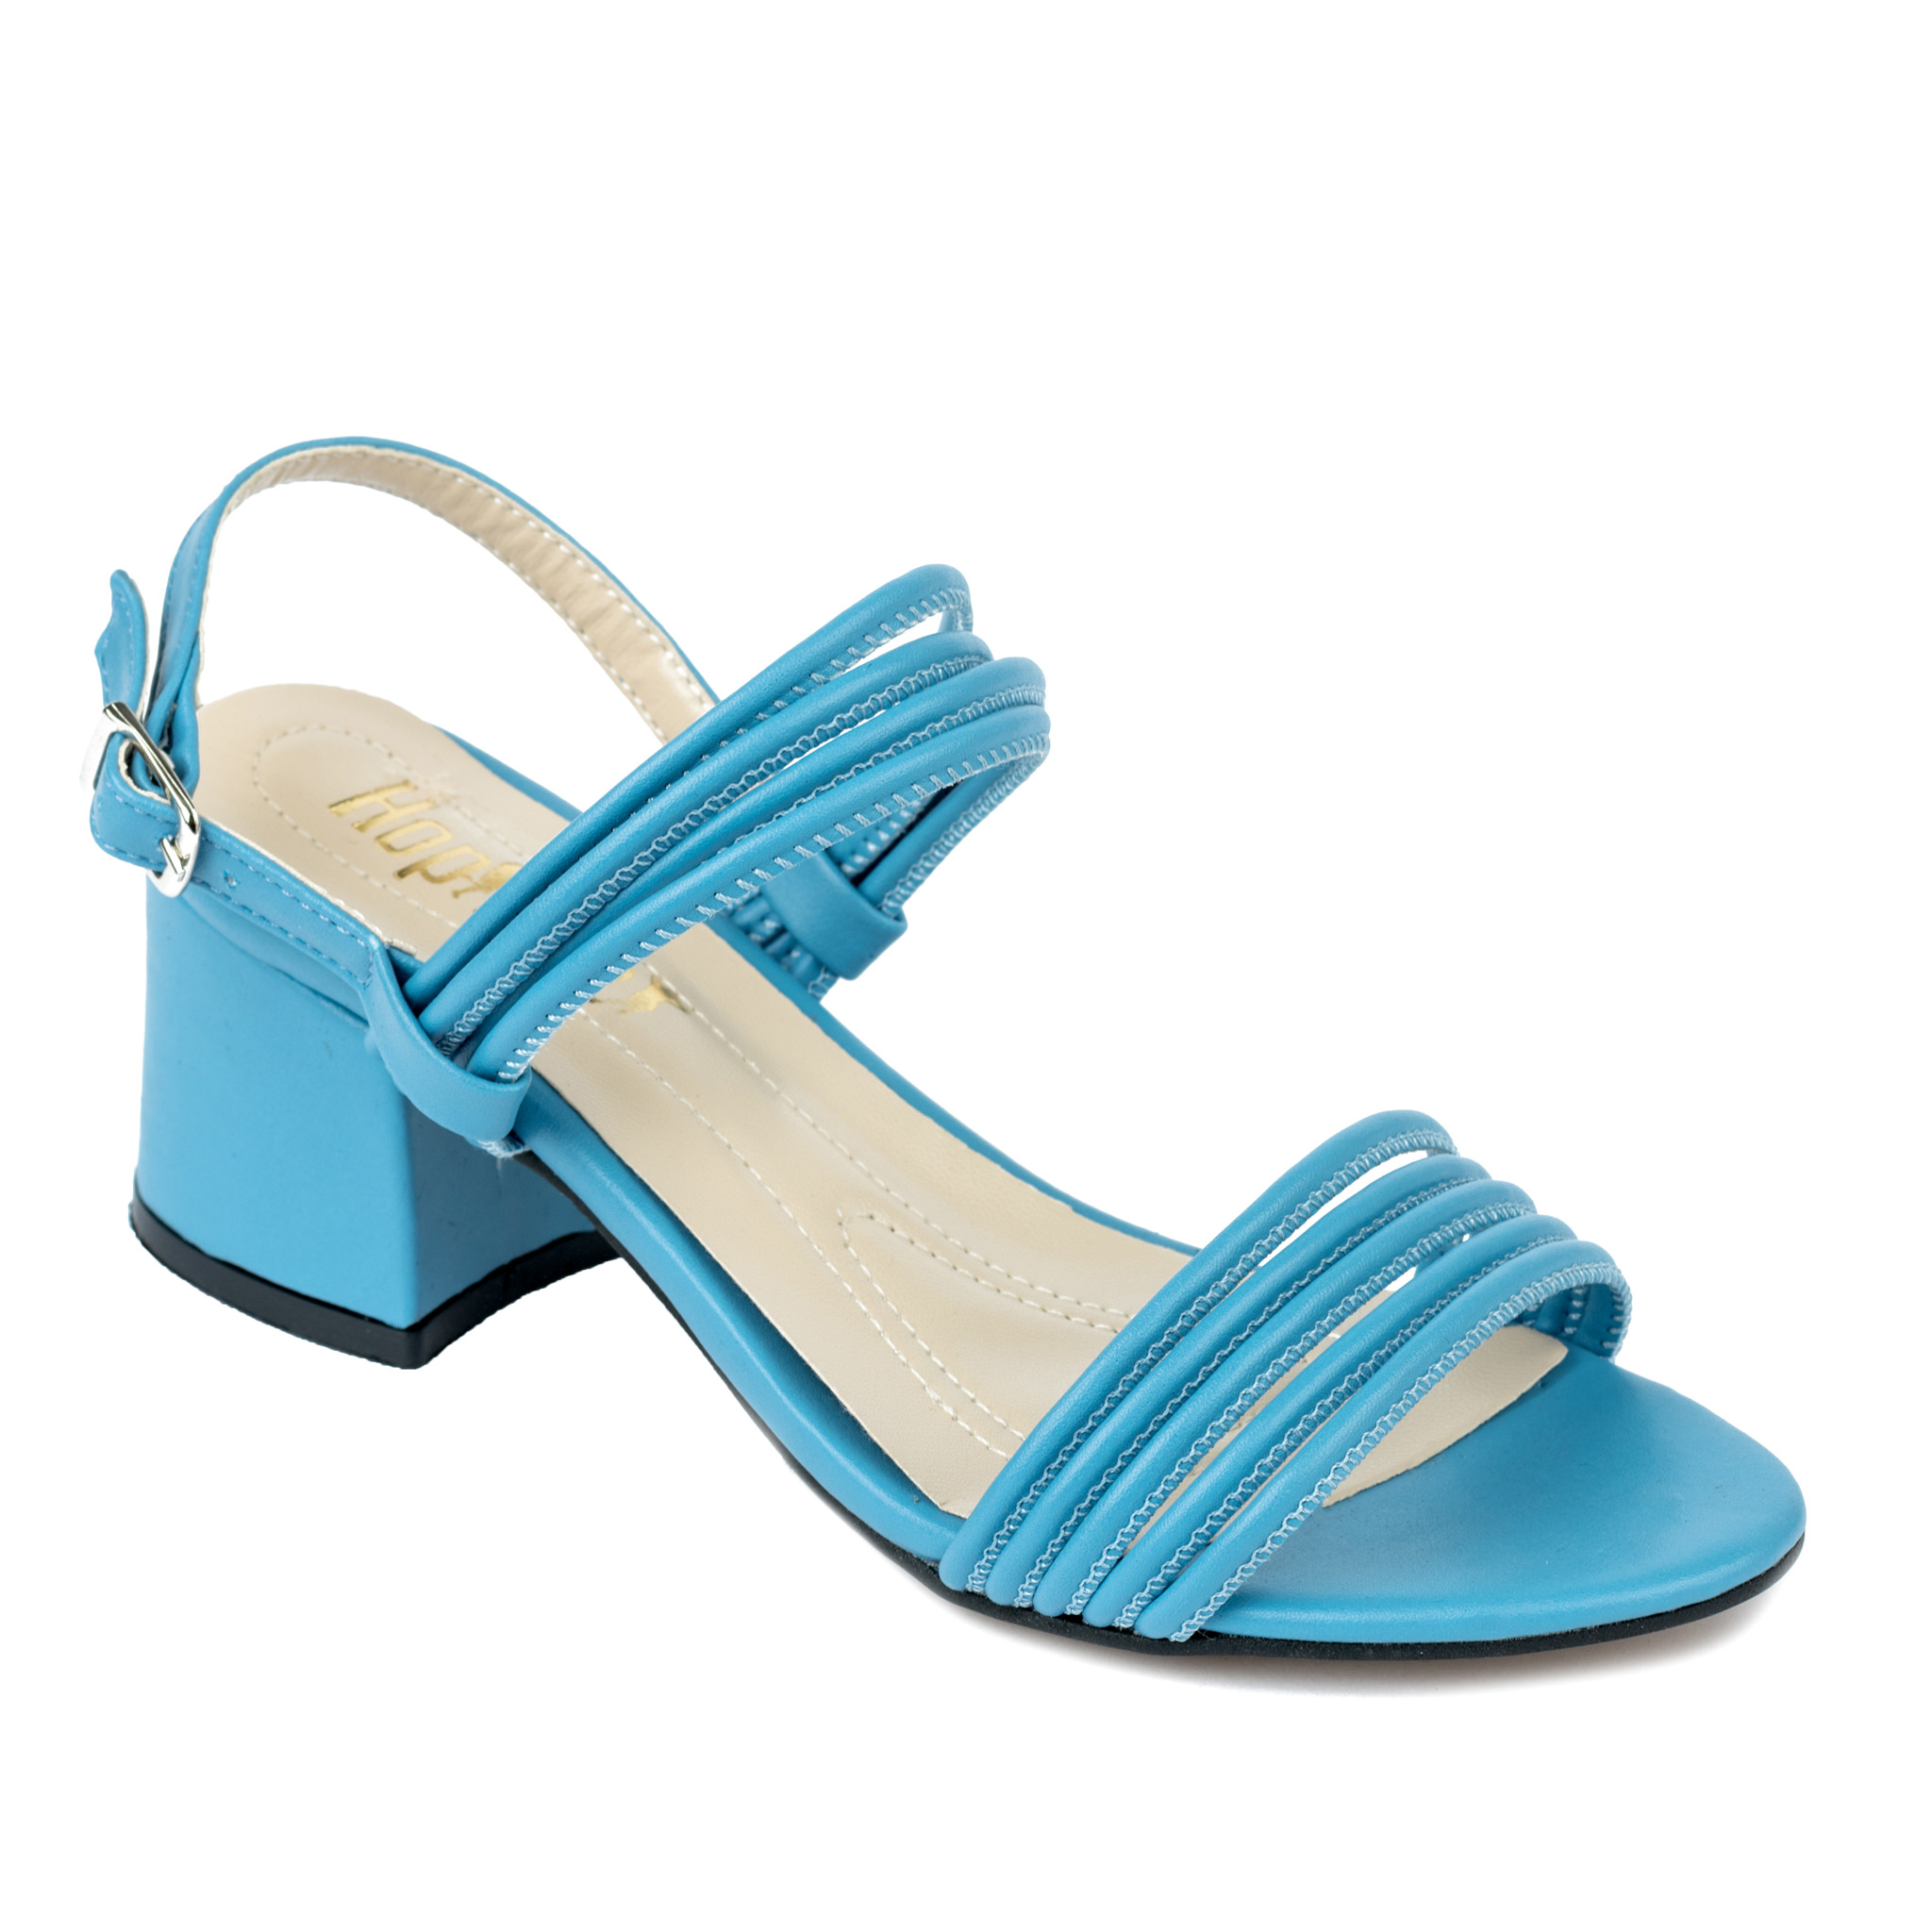 SANDALS WITH BELT AND THICK HEEL - BLUE